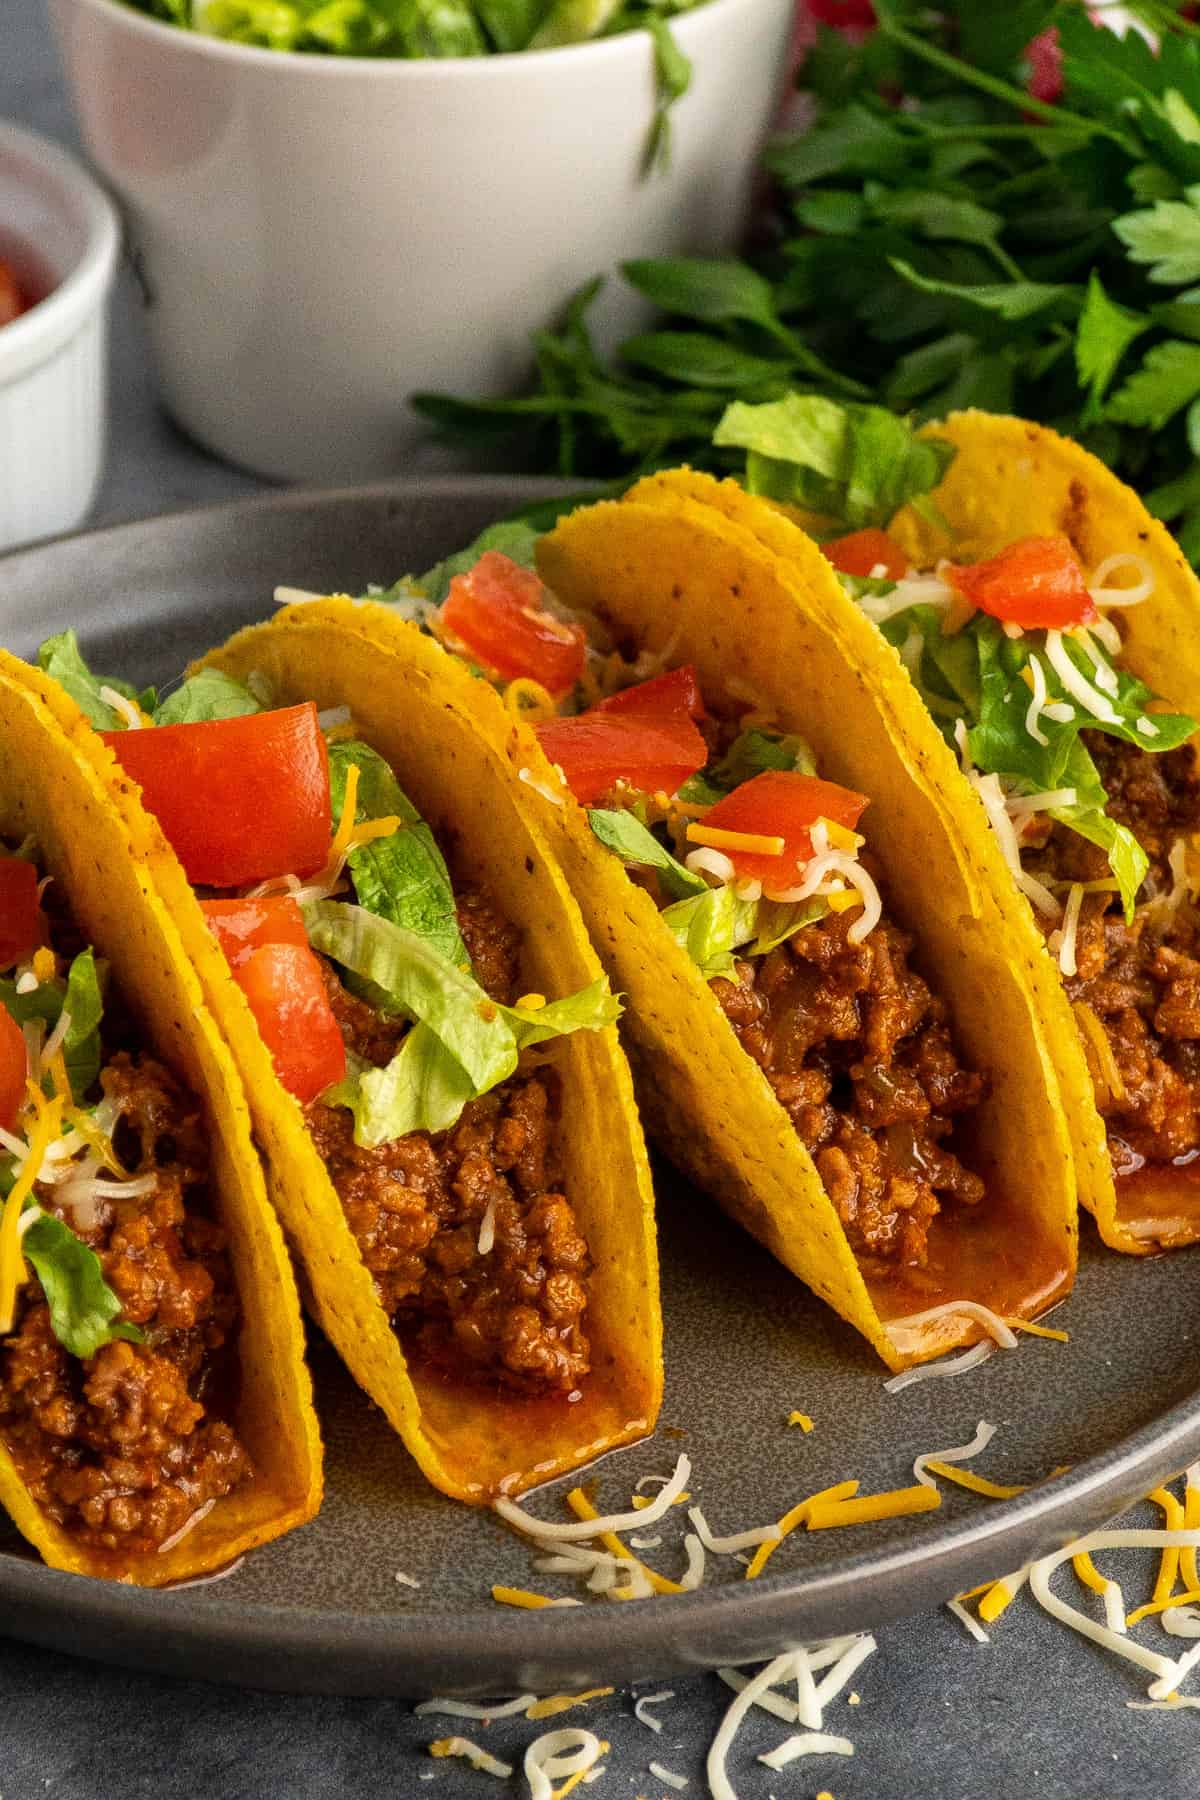 Four ground beef tacos in hard shells on a plate.